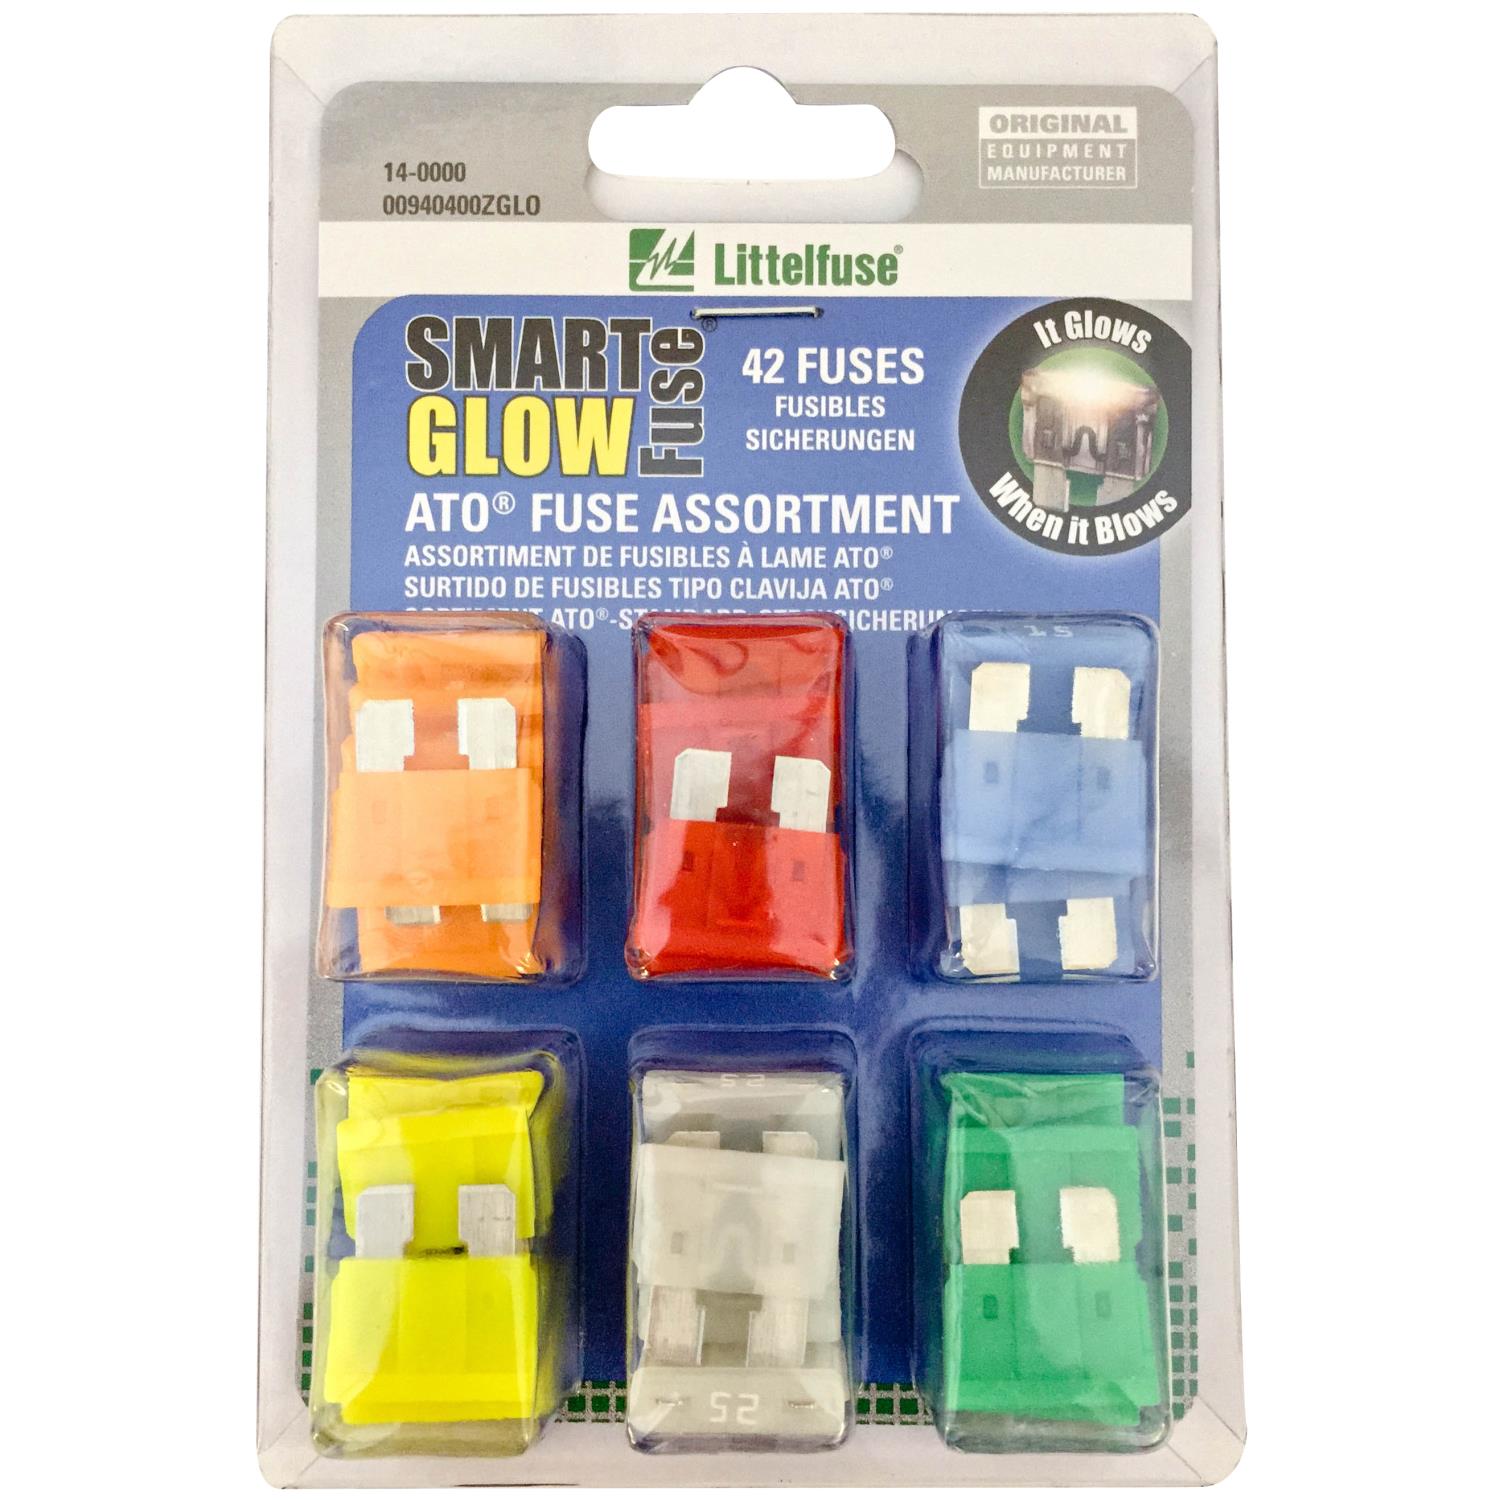 Value Pack ATO Smart Glow Fuse Kit